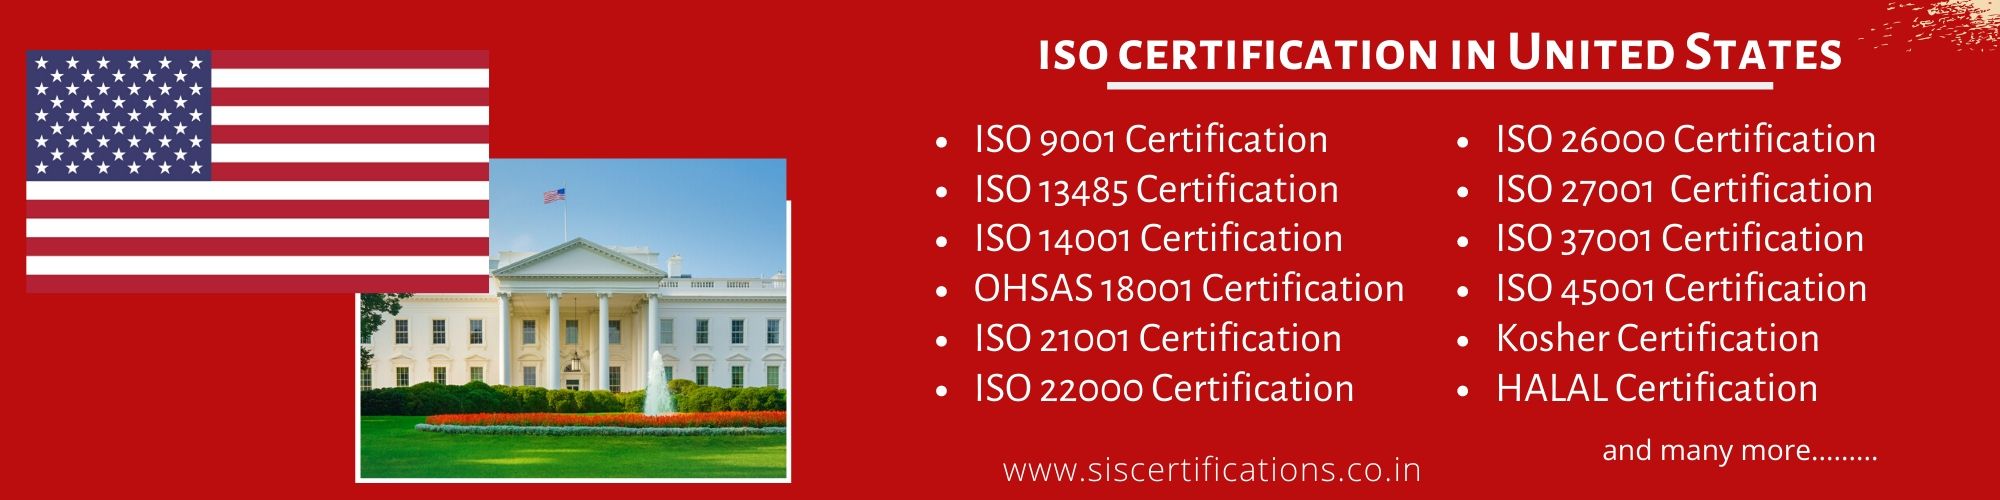 ISO Certification in United States Apply ISO Certification in United